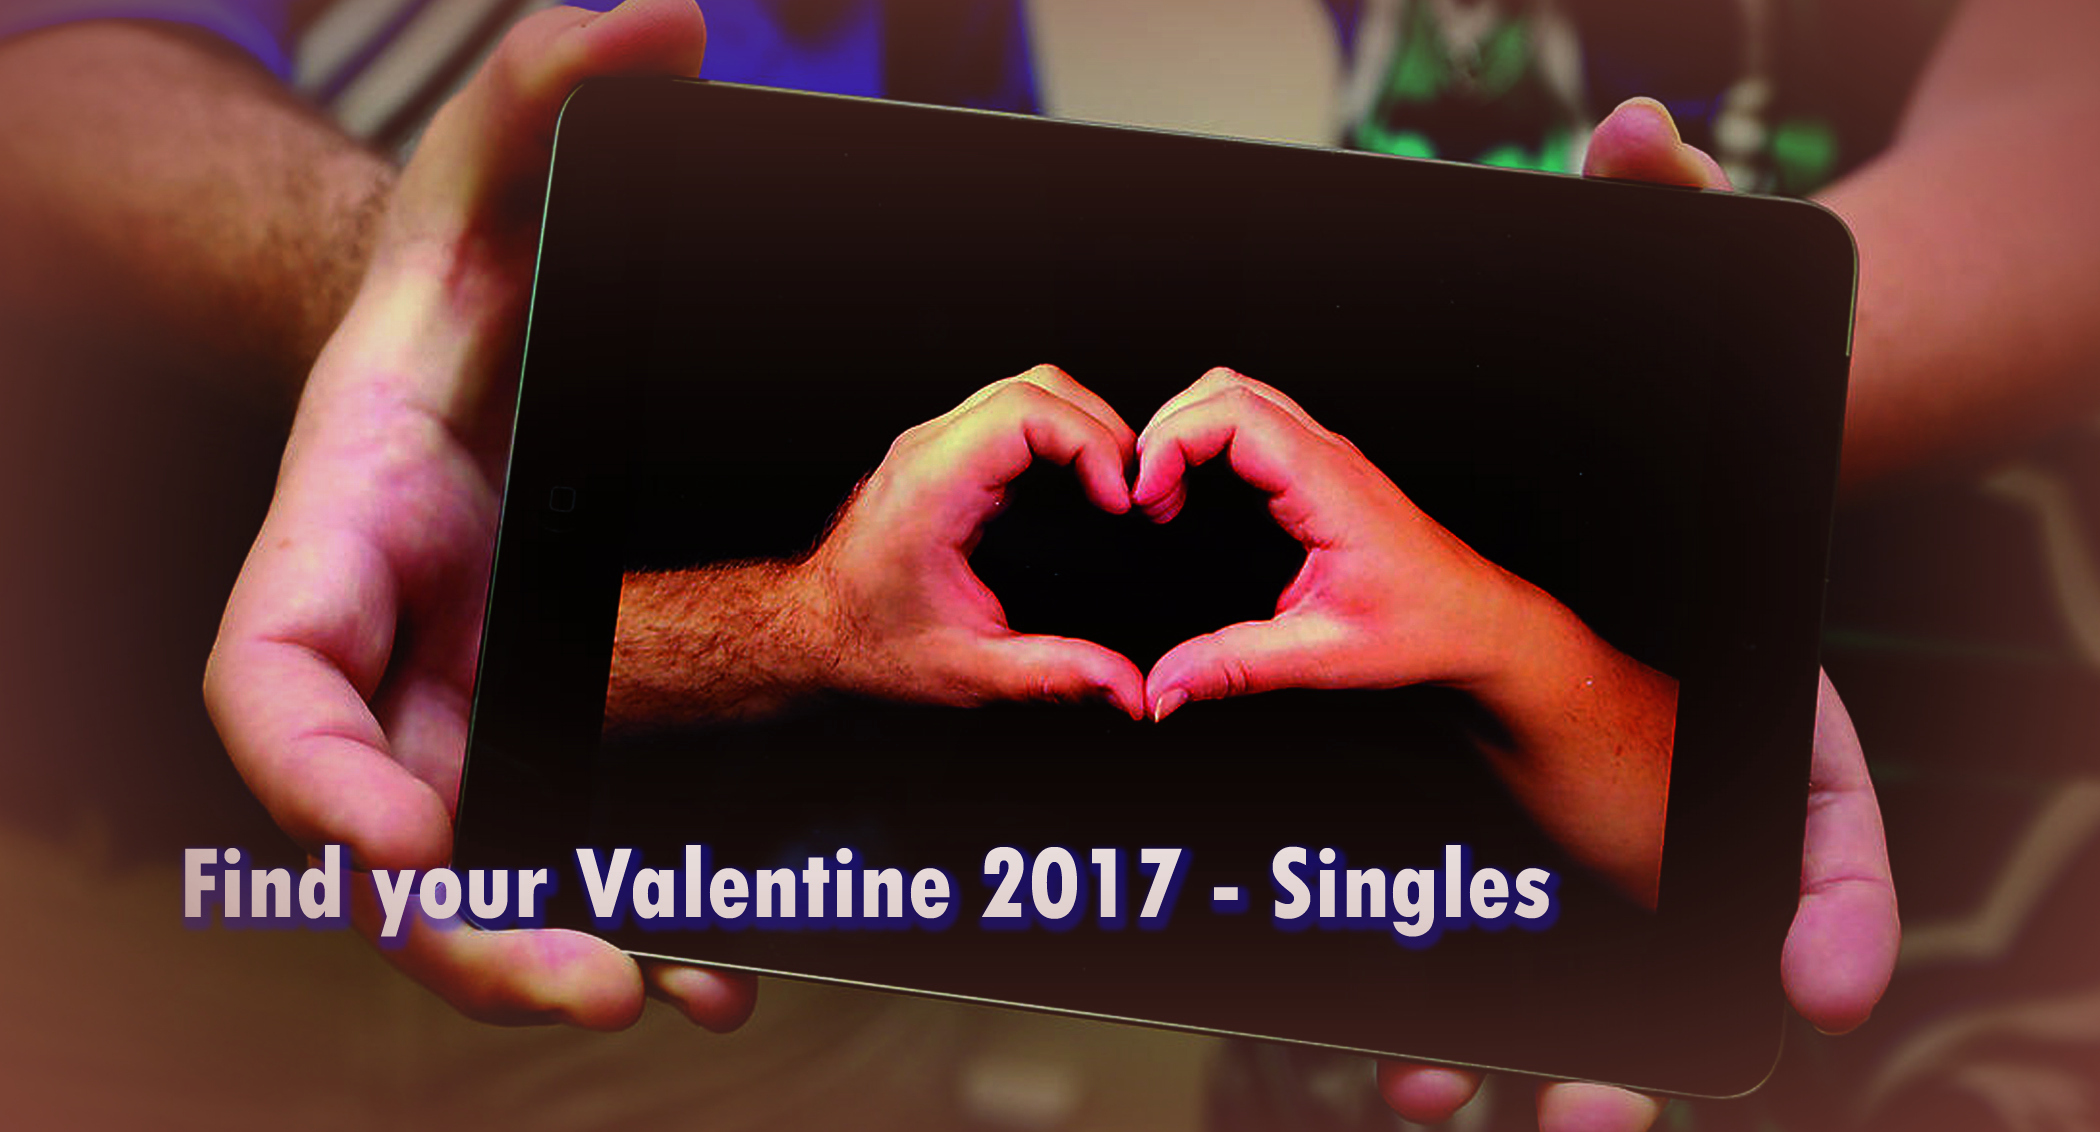 best and worst dating apps 2017 budget dating ideas